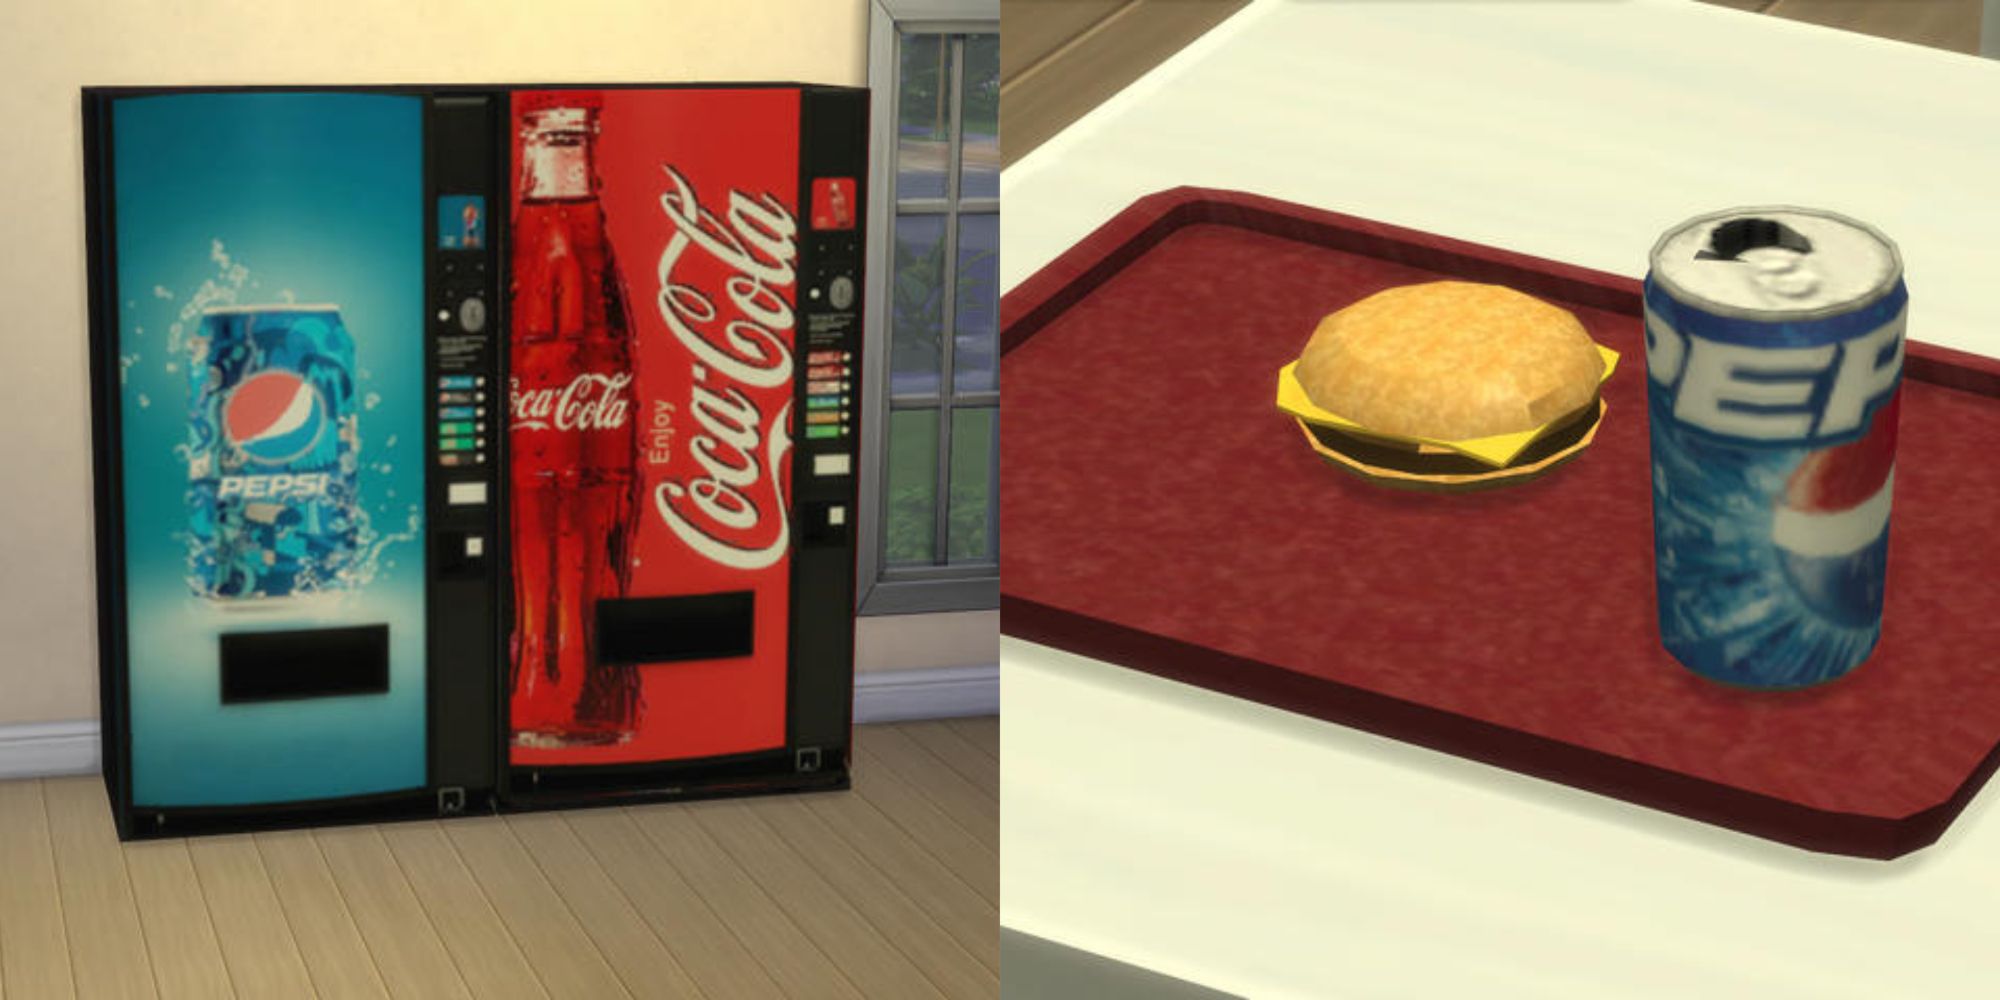 sims 4 cc featuring pepsi and coke vending machines and a food tray with a burger and pepsi can